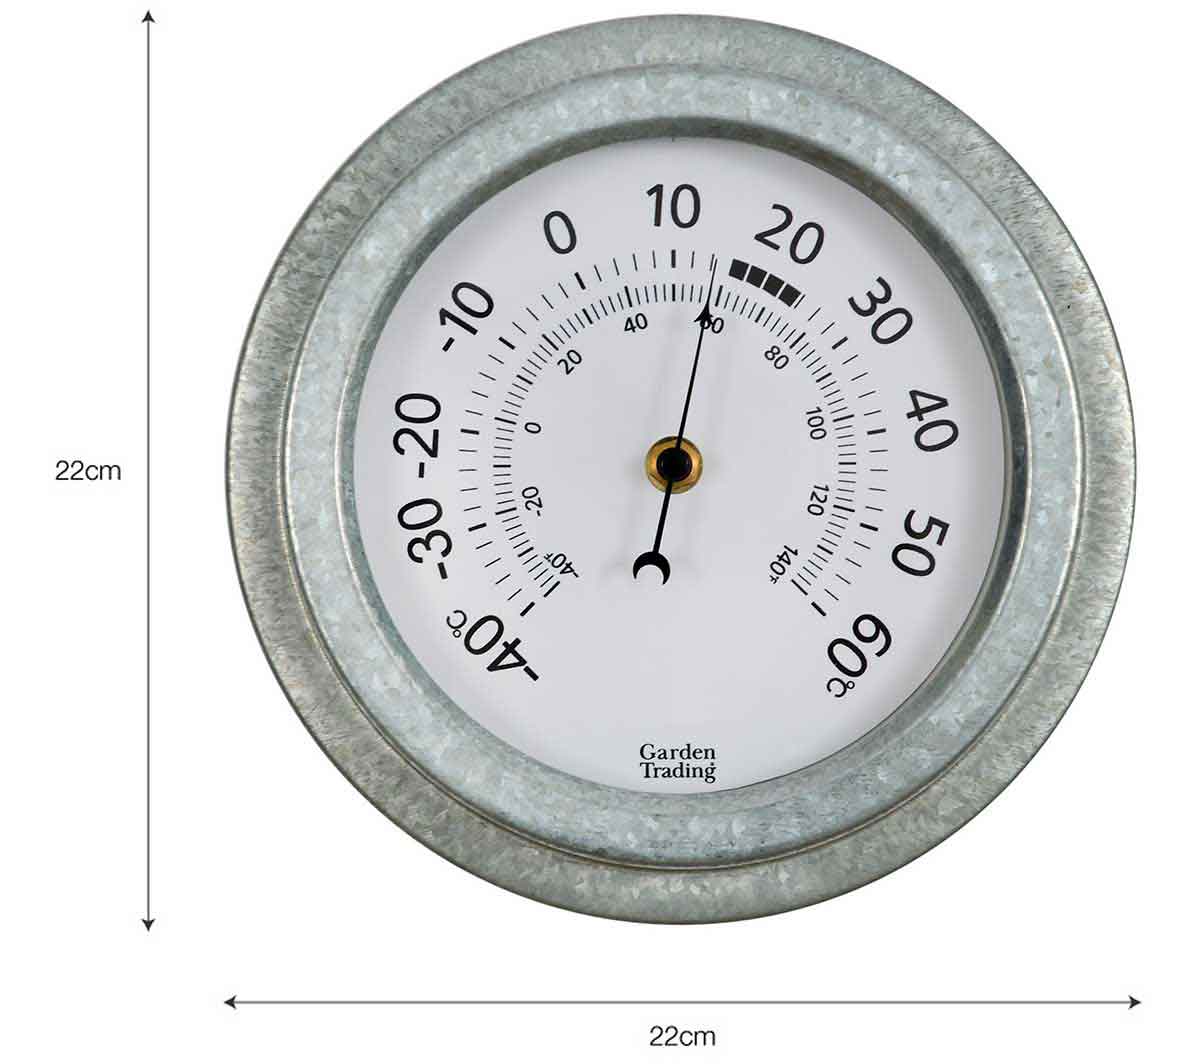 Garden Trading St Ives Thermometer overview